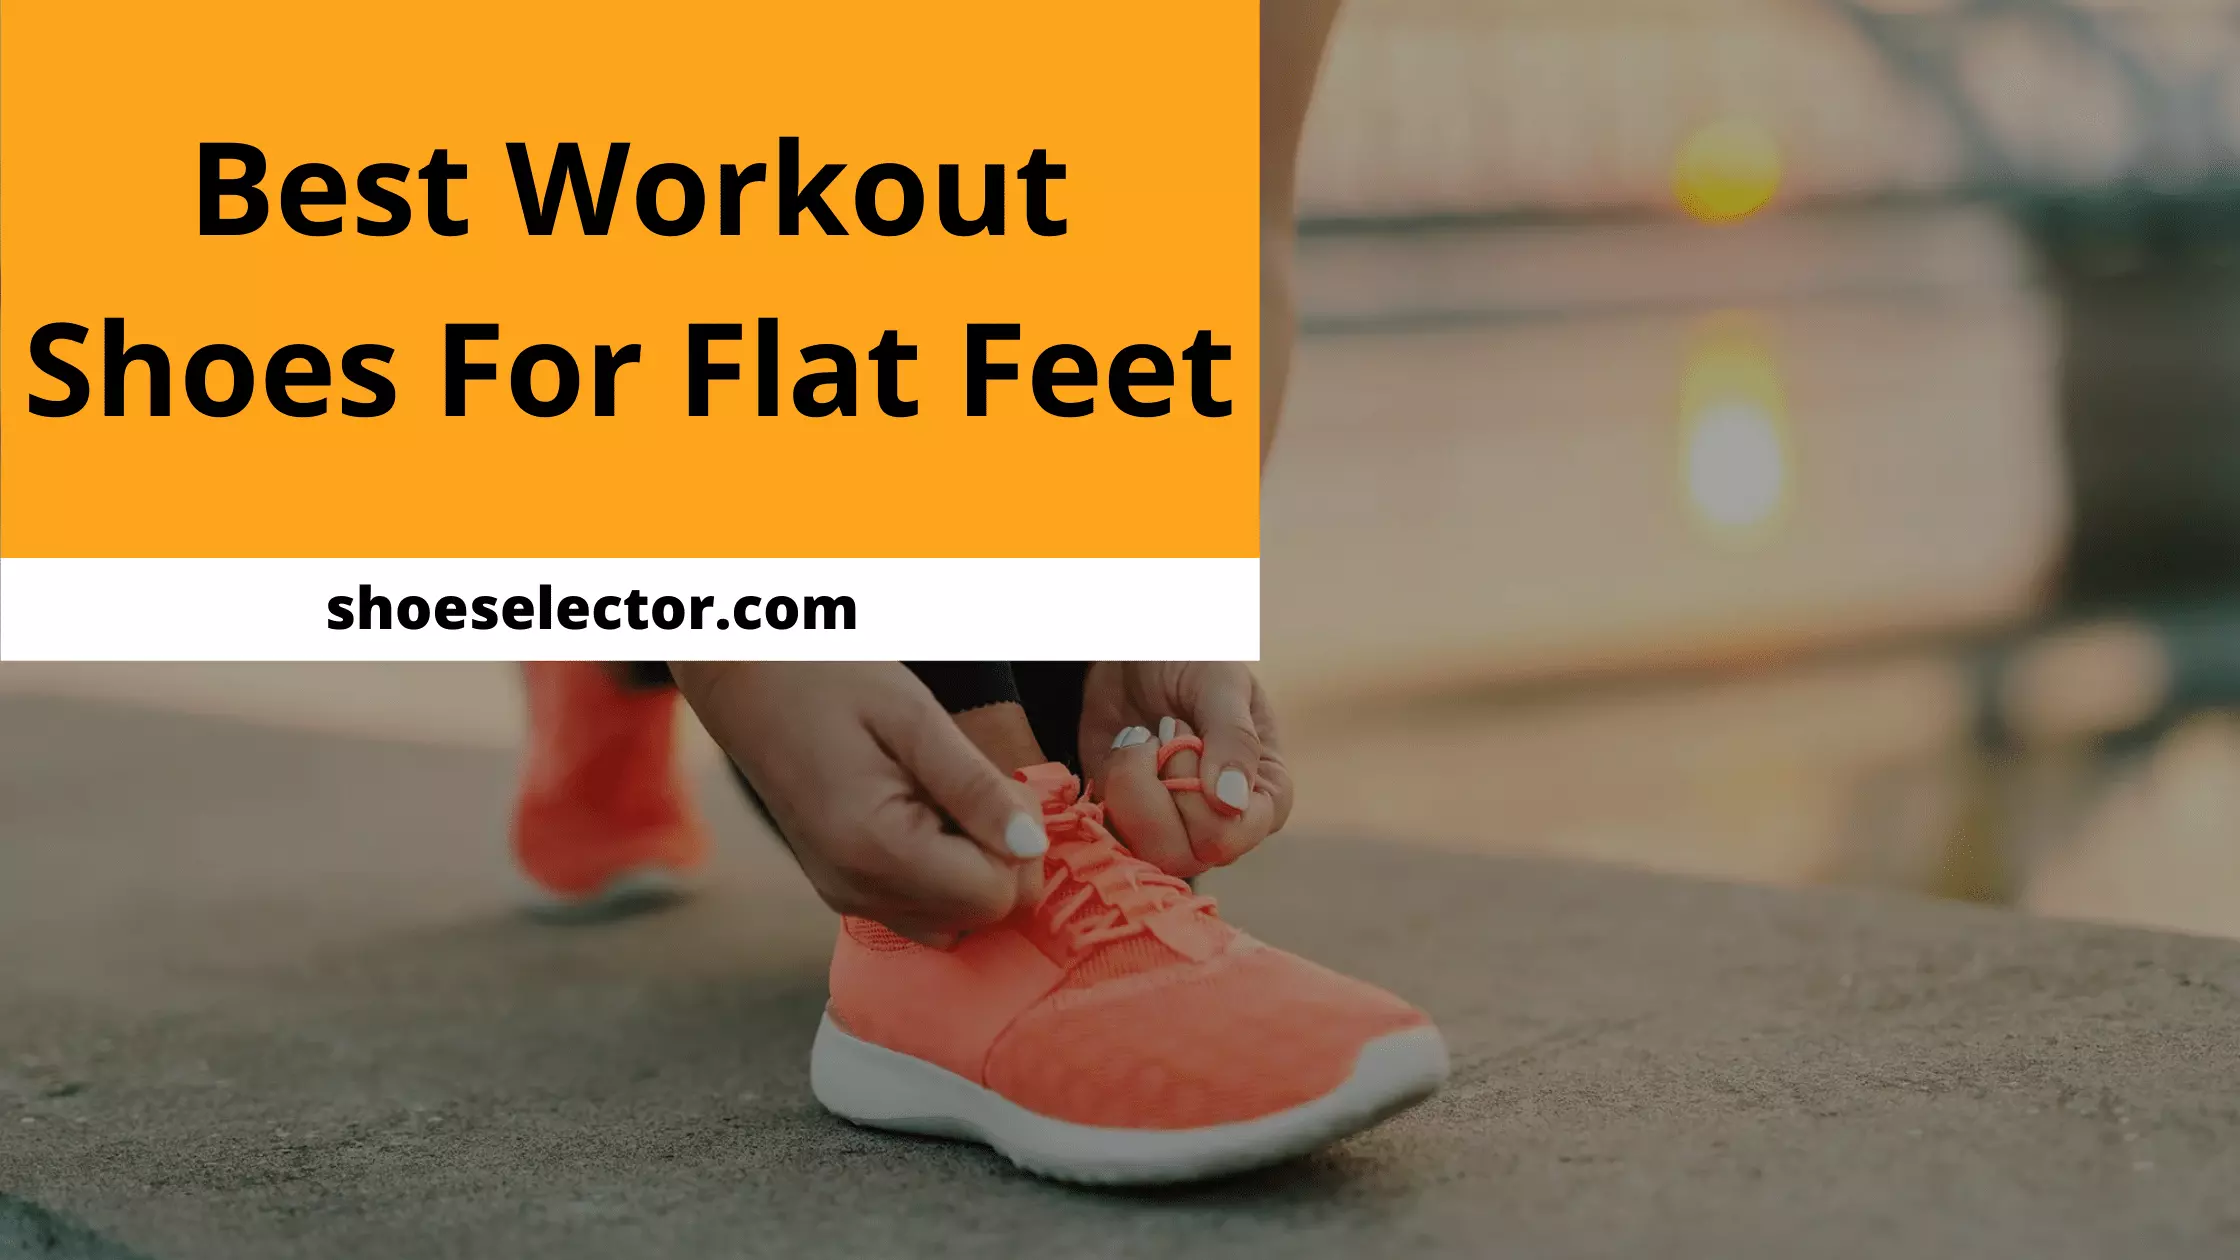 Best Workout Shoes For Flat Feet [REVEALED Top Picks in 2022]